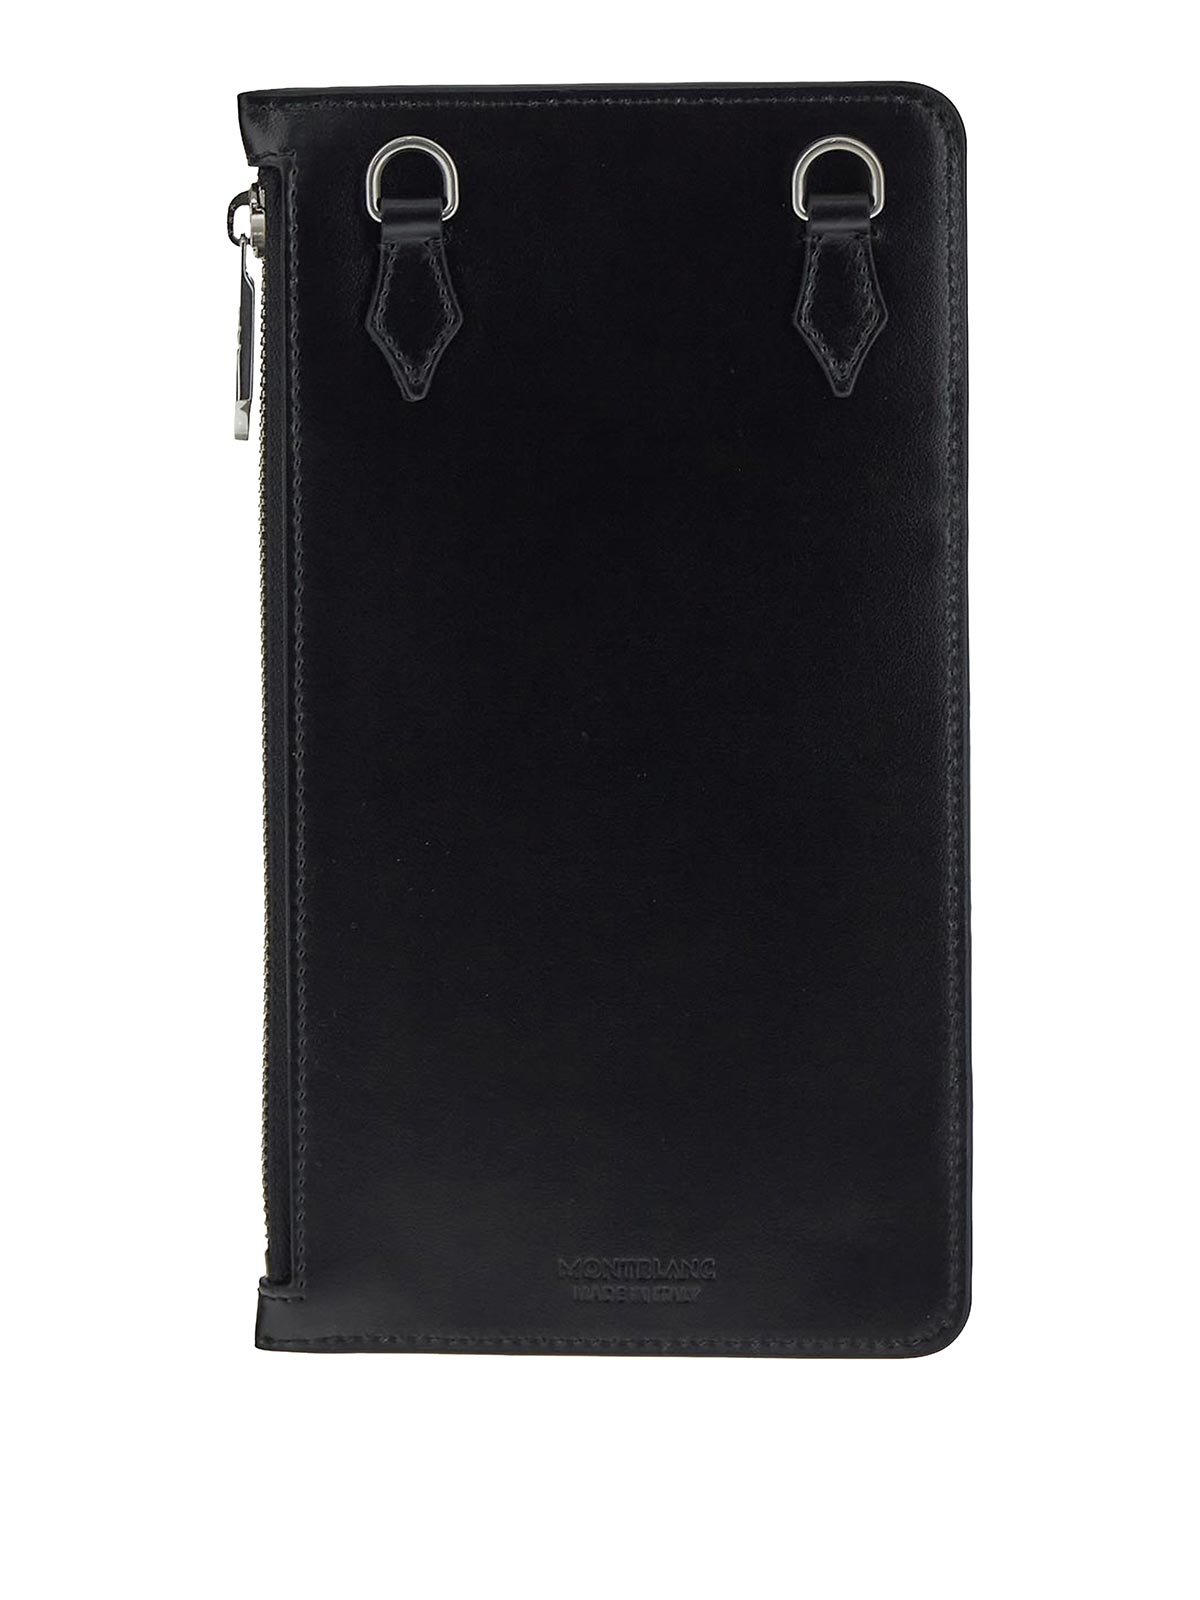 Montblanc Wallet In Black With Card Slots